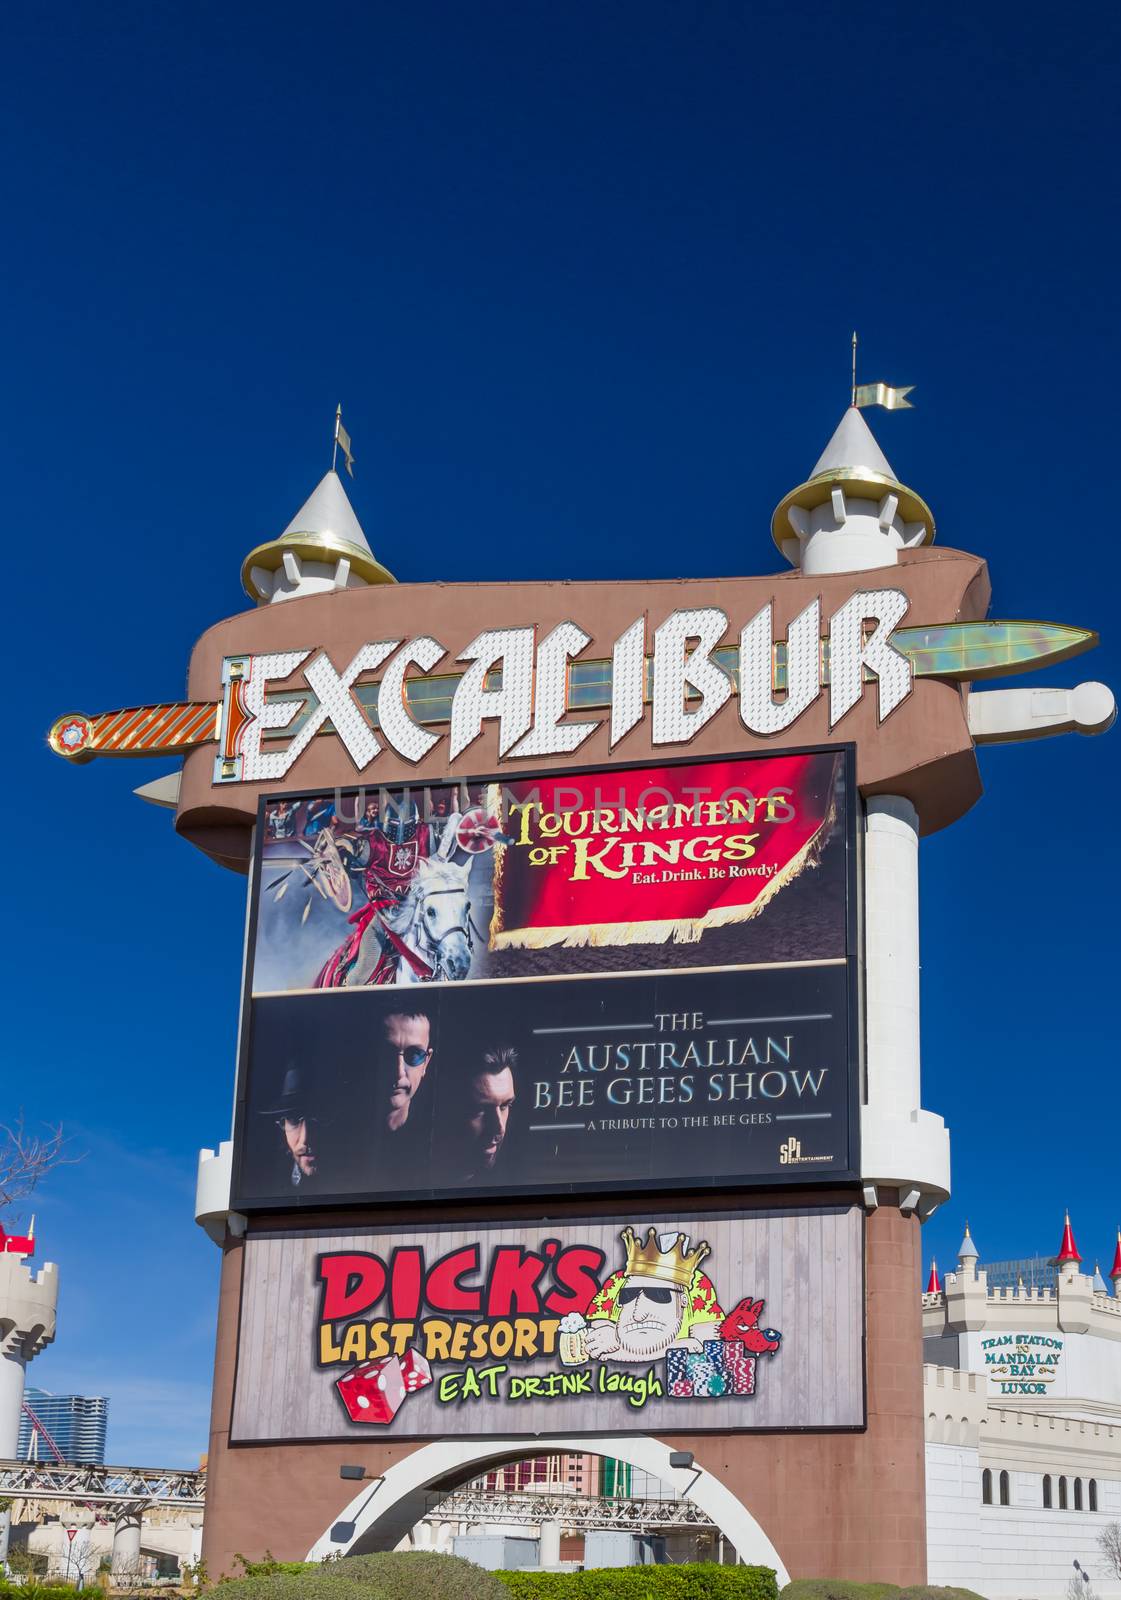 The Excalibur Hotel and Casino by wolterk